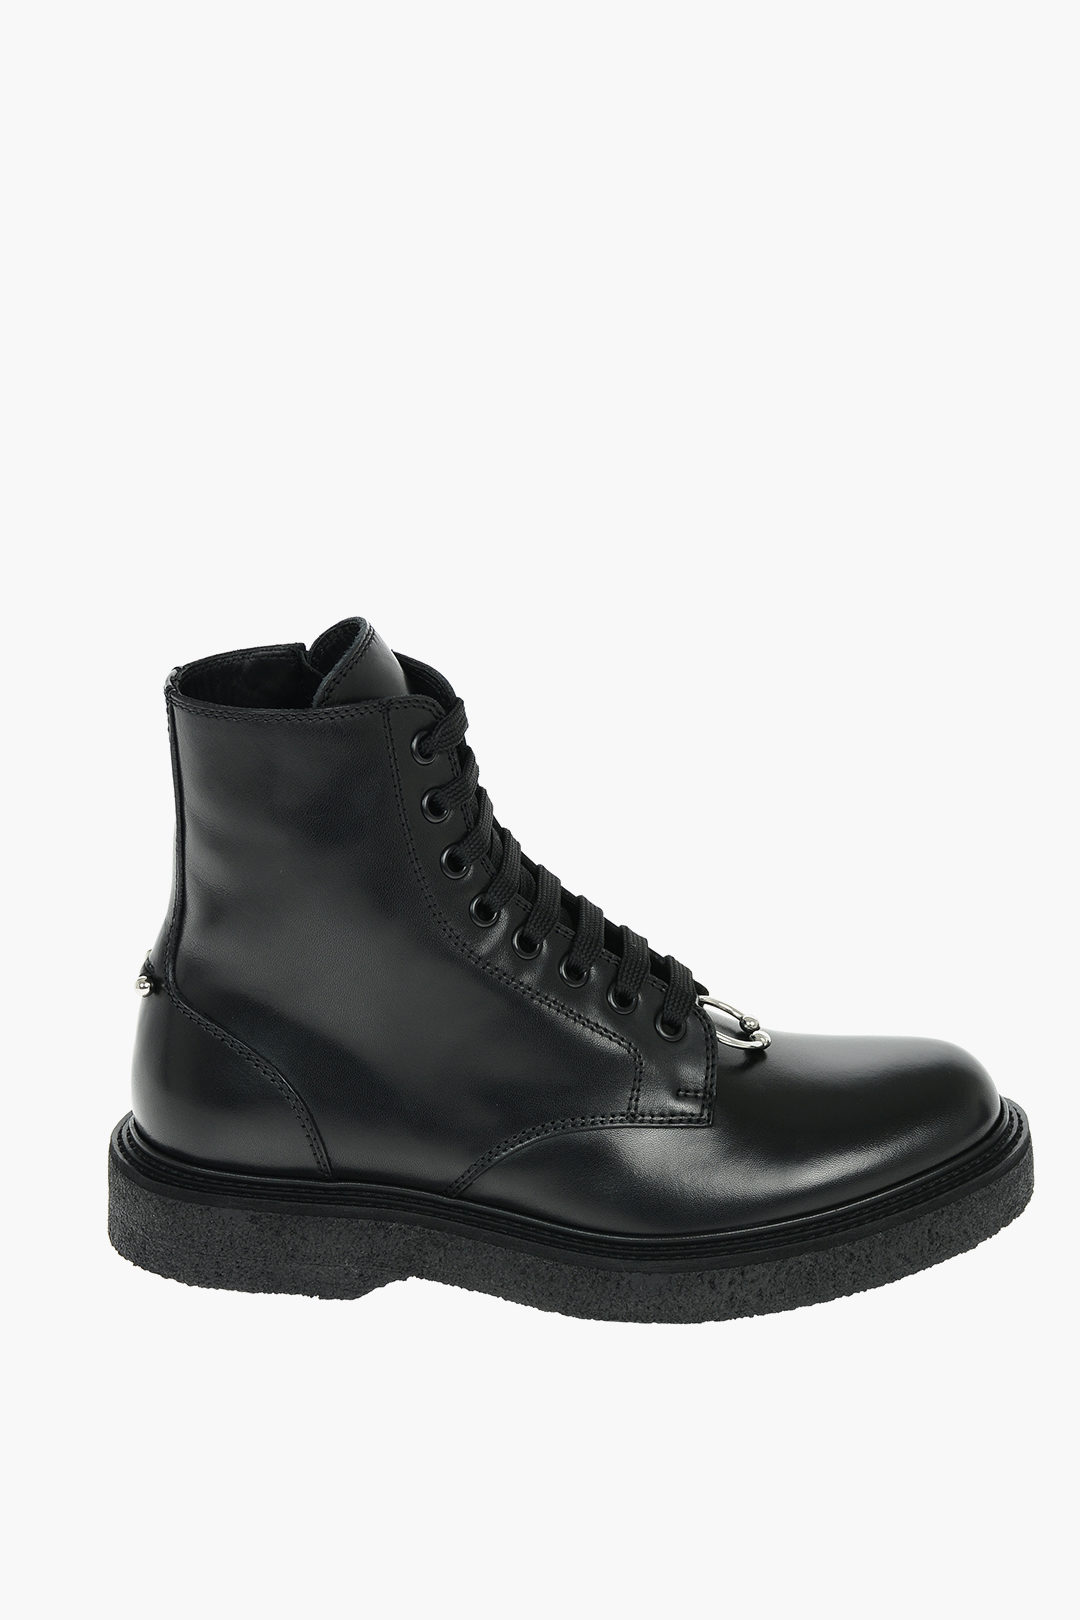 Neil Barrett Leather PIERCED PUNK Ankle Boots with CREPE Sole men ...